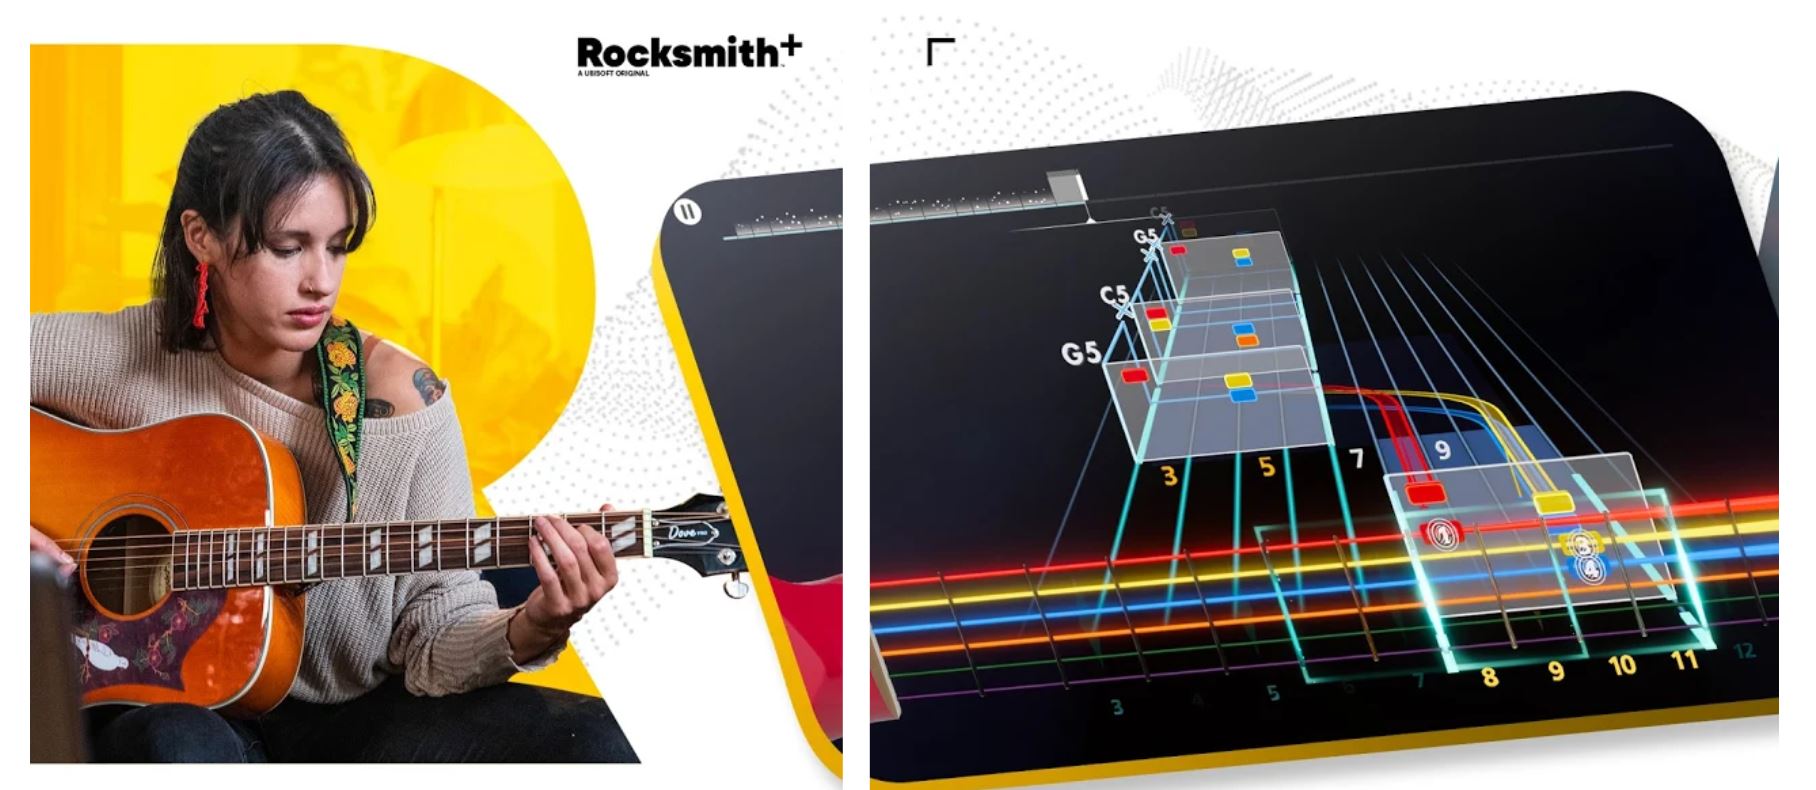 A screen capture of the Rocksmith app.